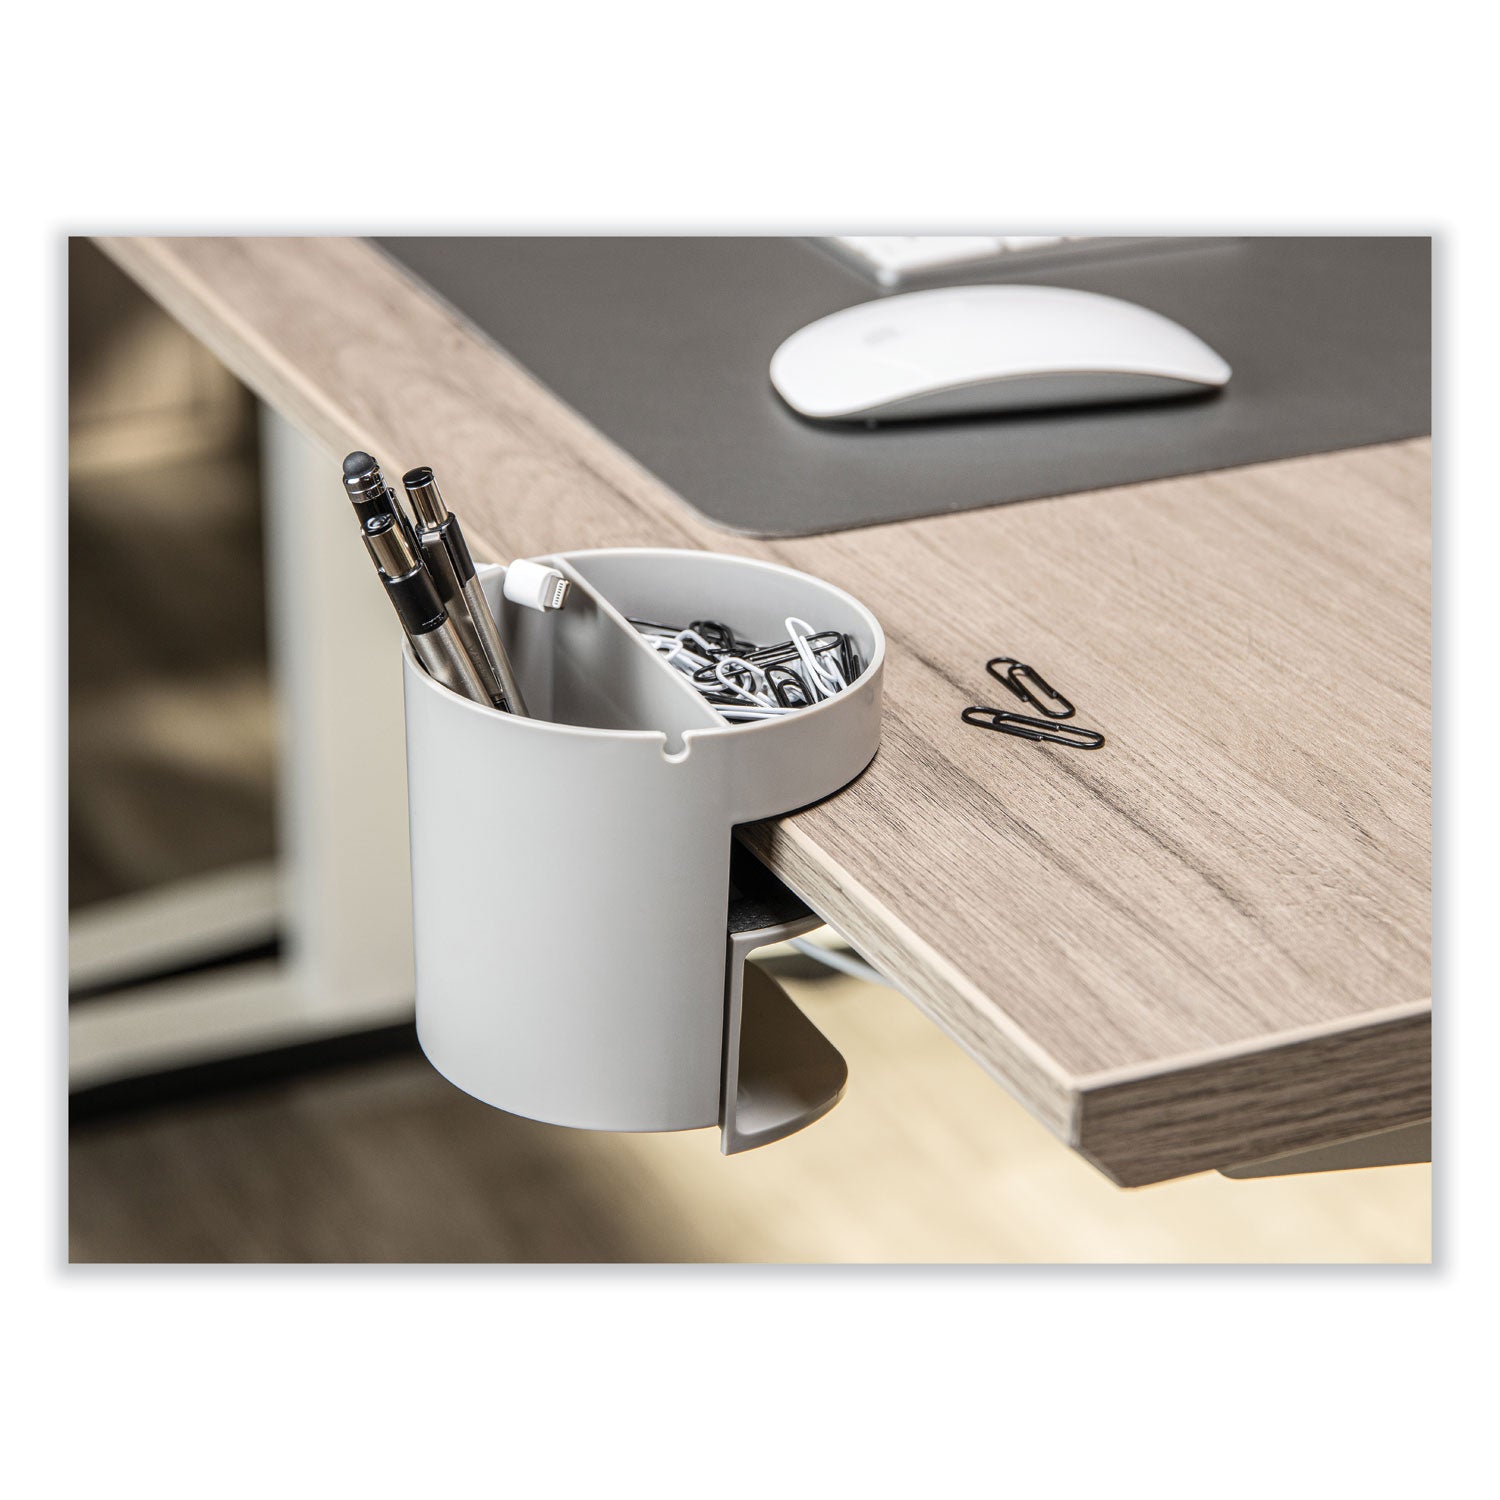 standing-desk-small-desk-organizer-two-sections-385-x-385-x-354-gray_def400001 - 5